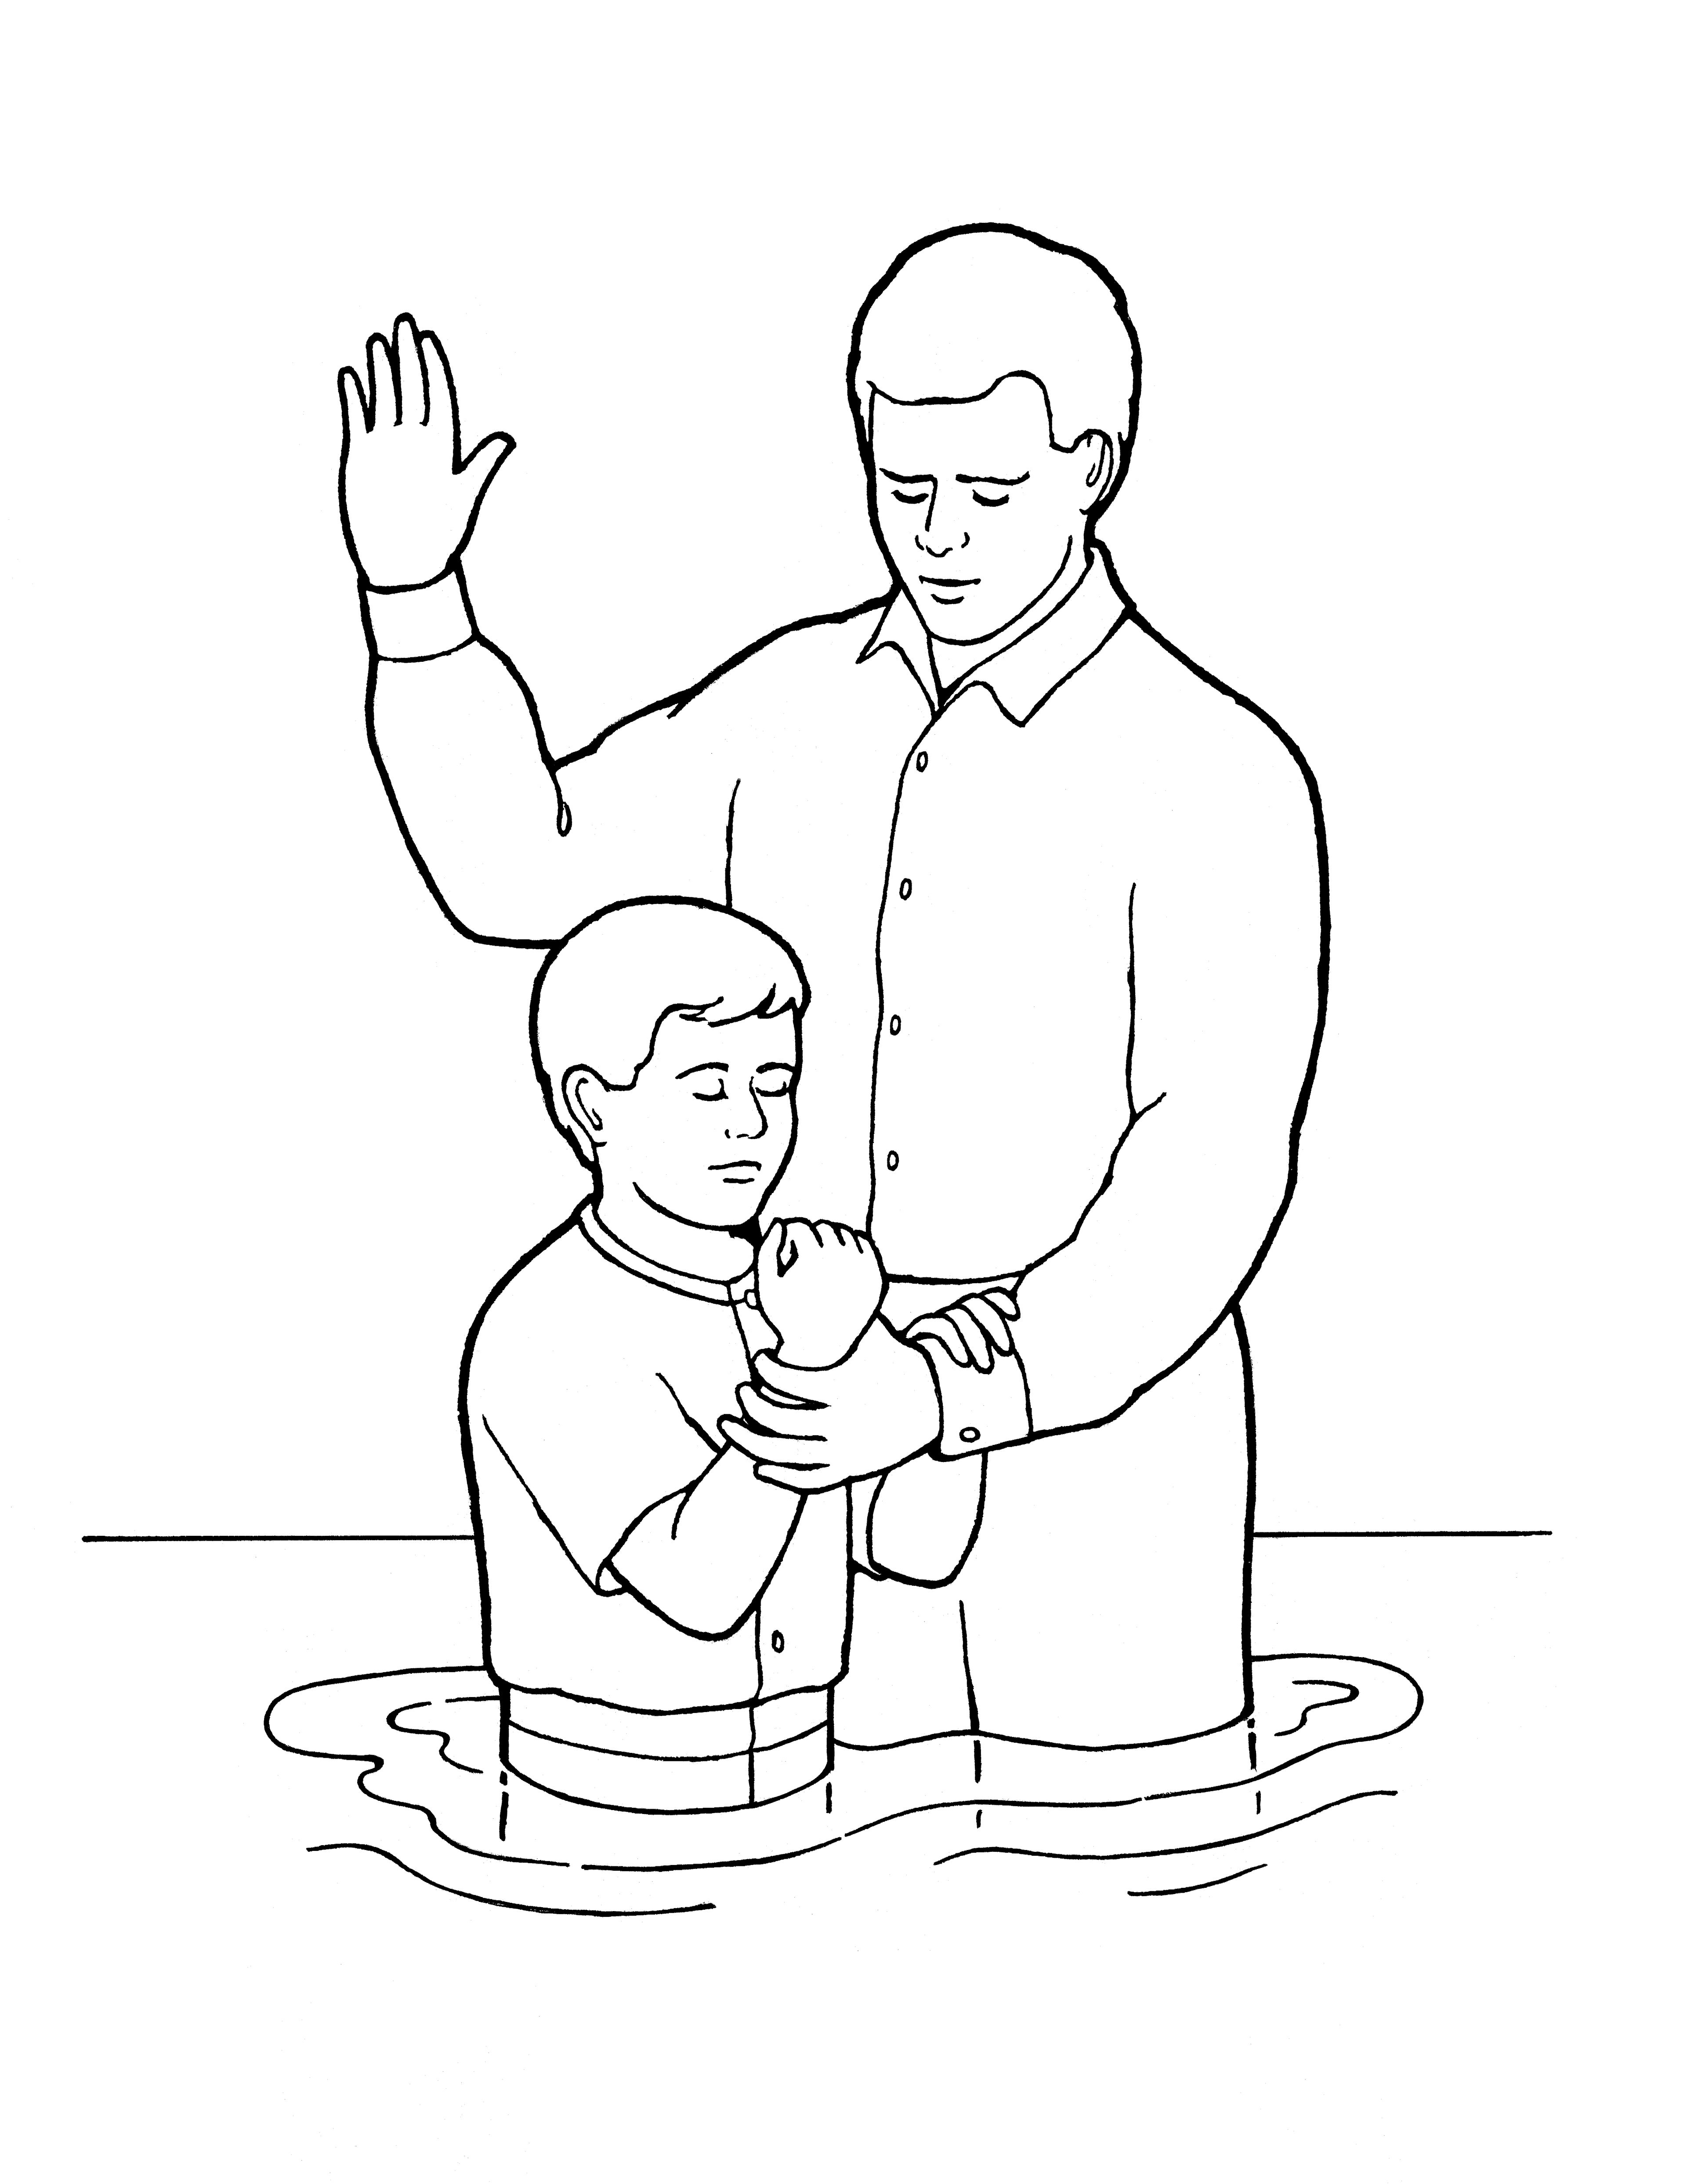 An illustration of a young boy being baptized, from the nursery manual Behold Your Little Ones (2008), page 111.